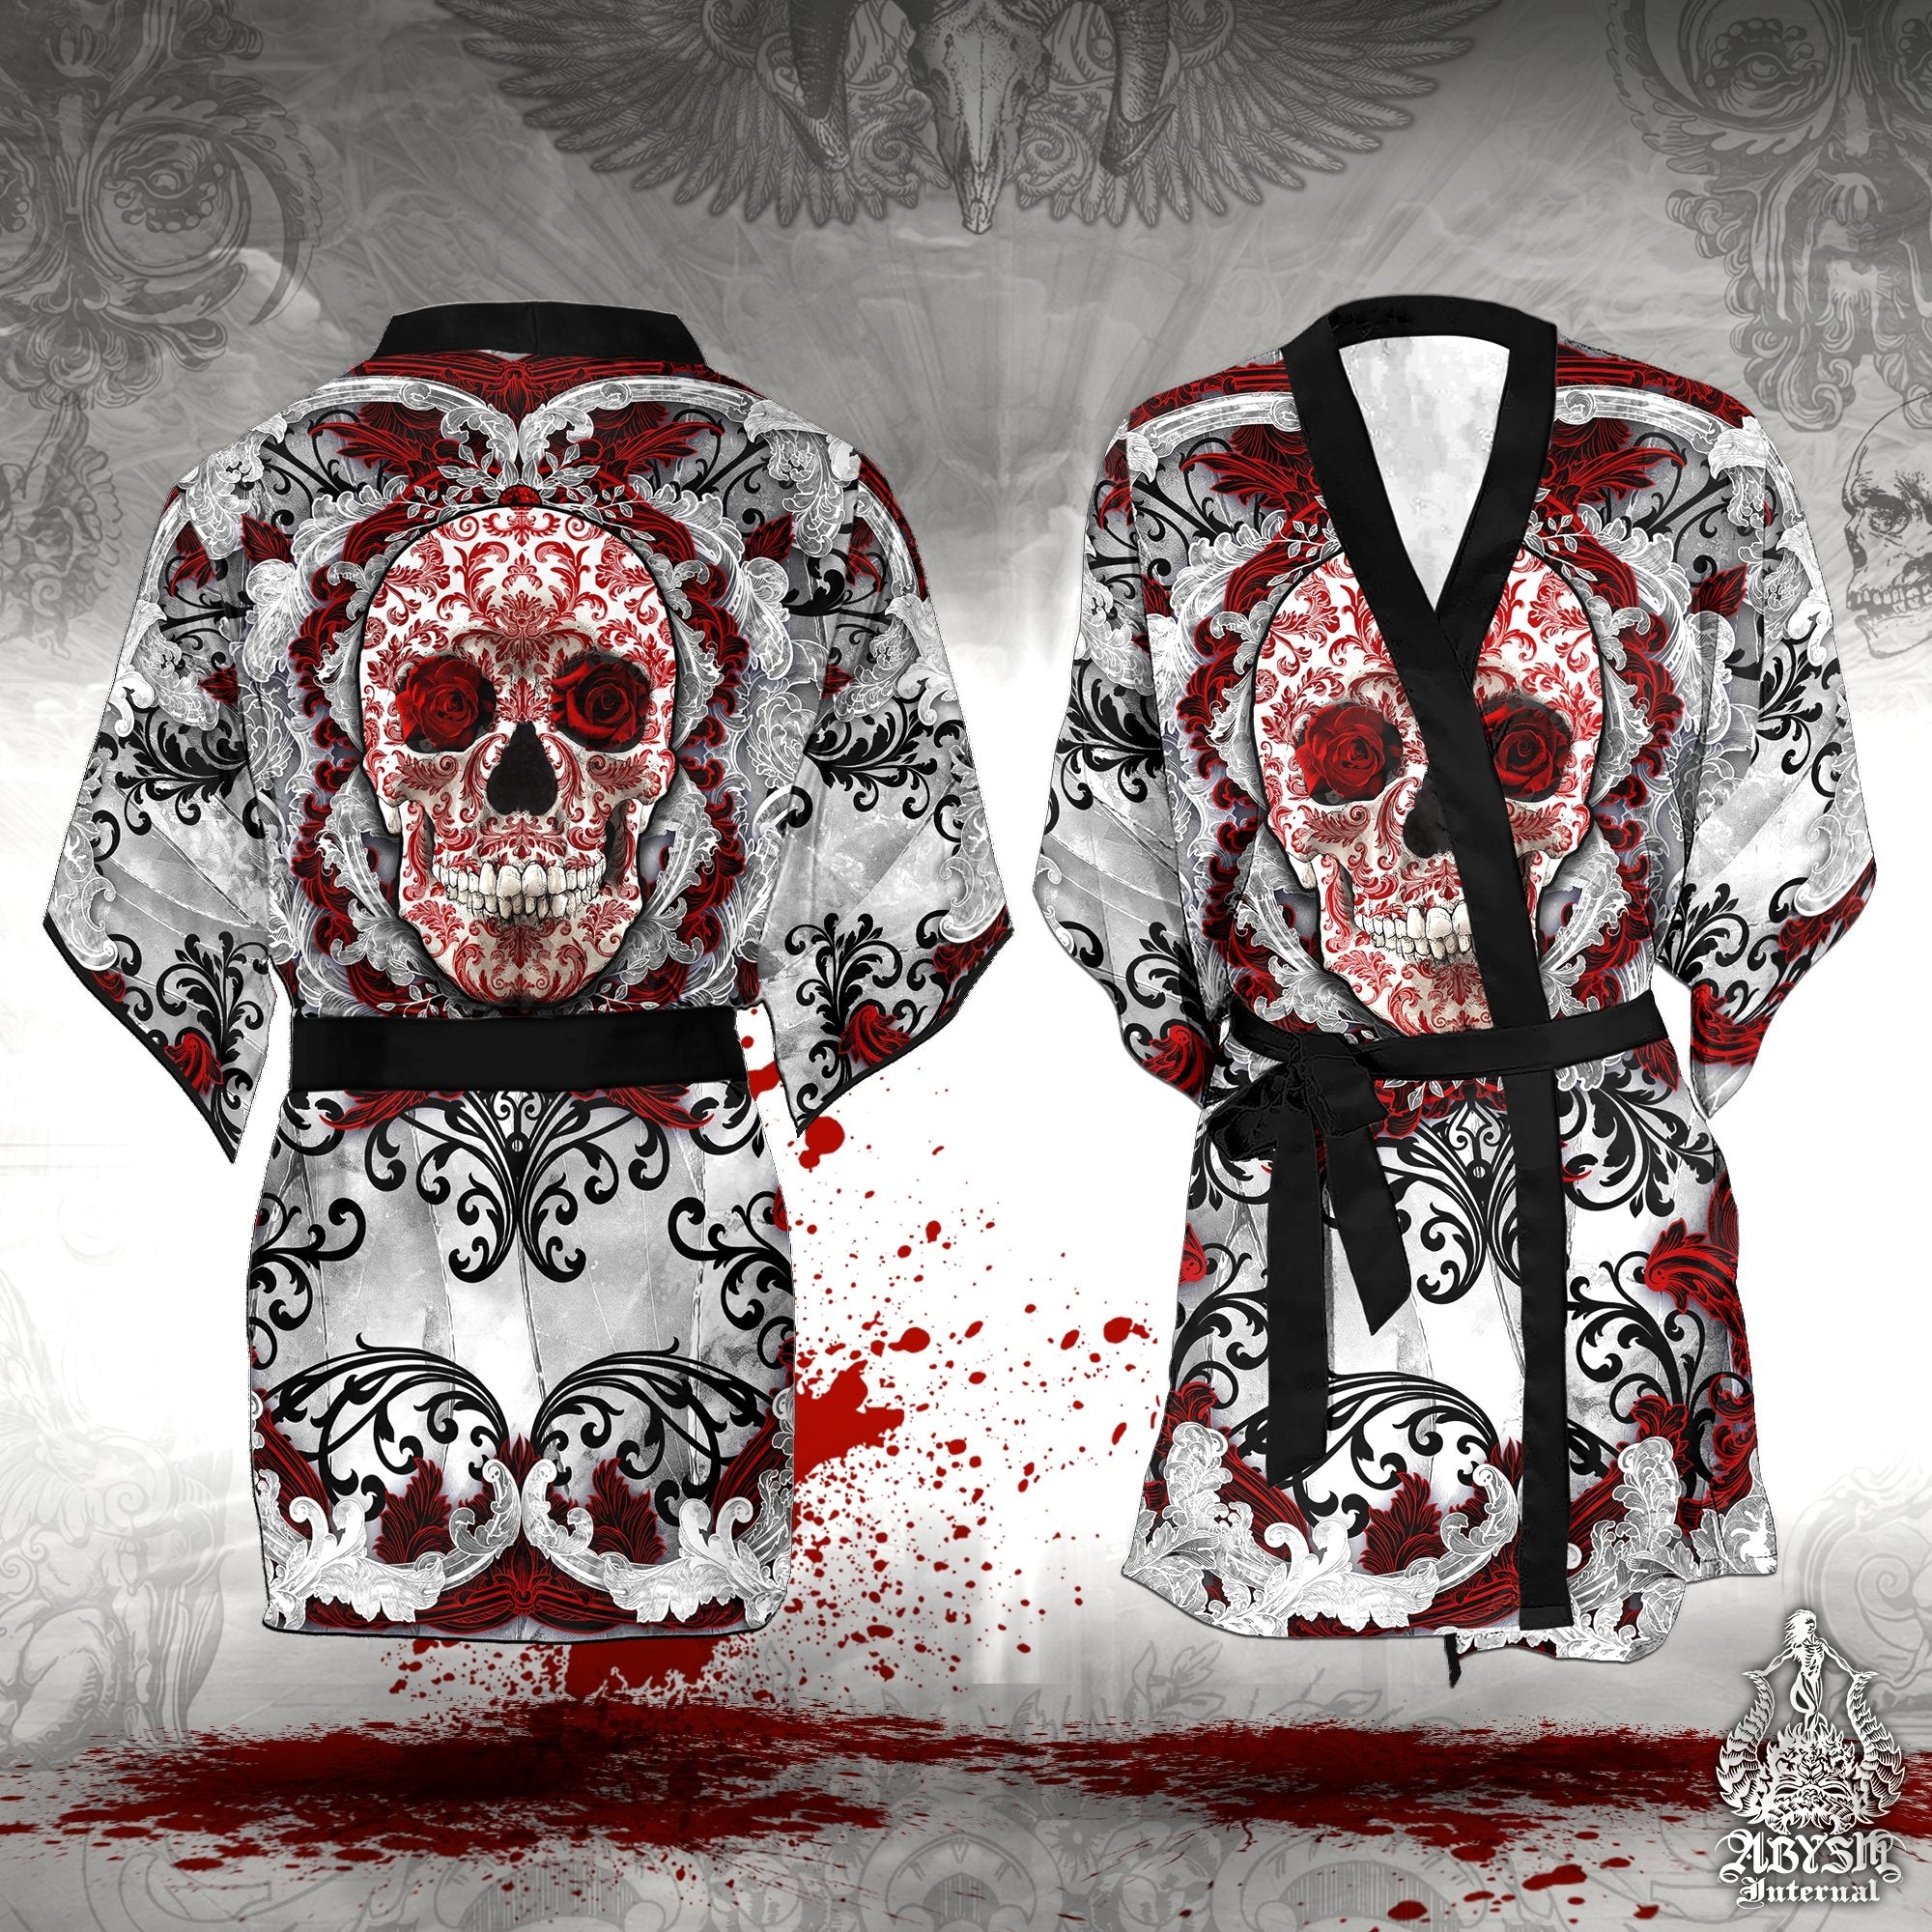 Skull Cover Up, Beach Outfit, Party Kimono, Summer Festival Robe, Gothic Indie and Alternative Clothing, Unisex - Bloody White Goth - Abysm Internal